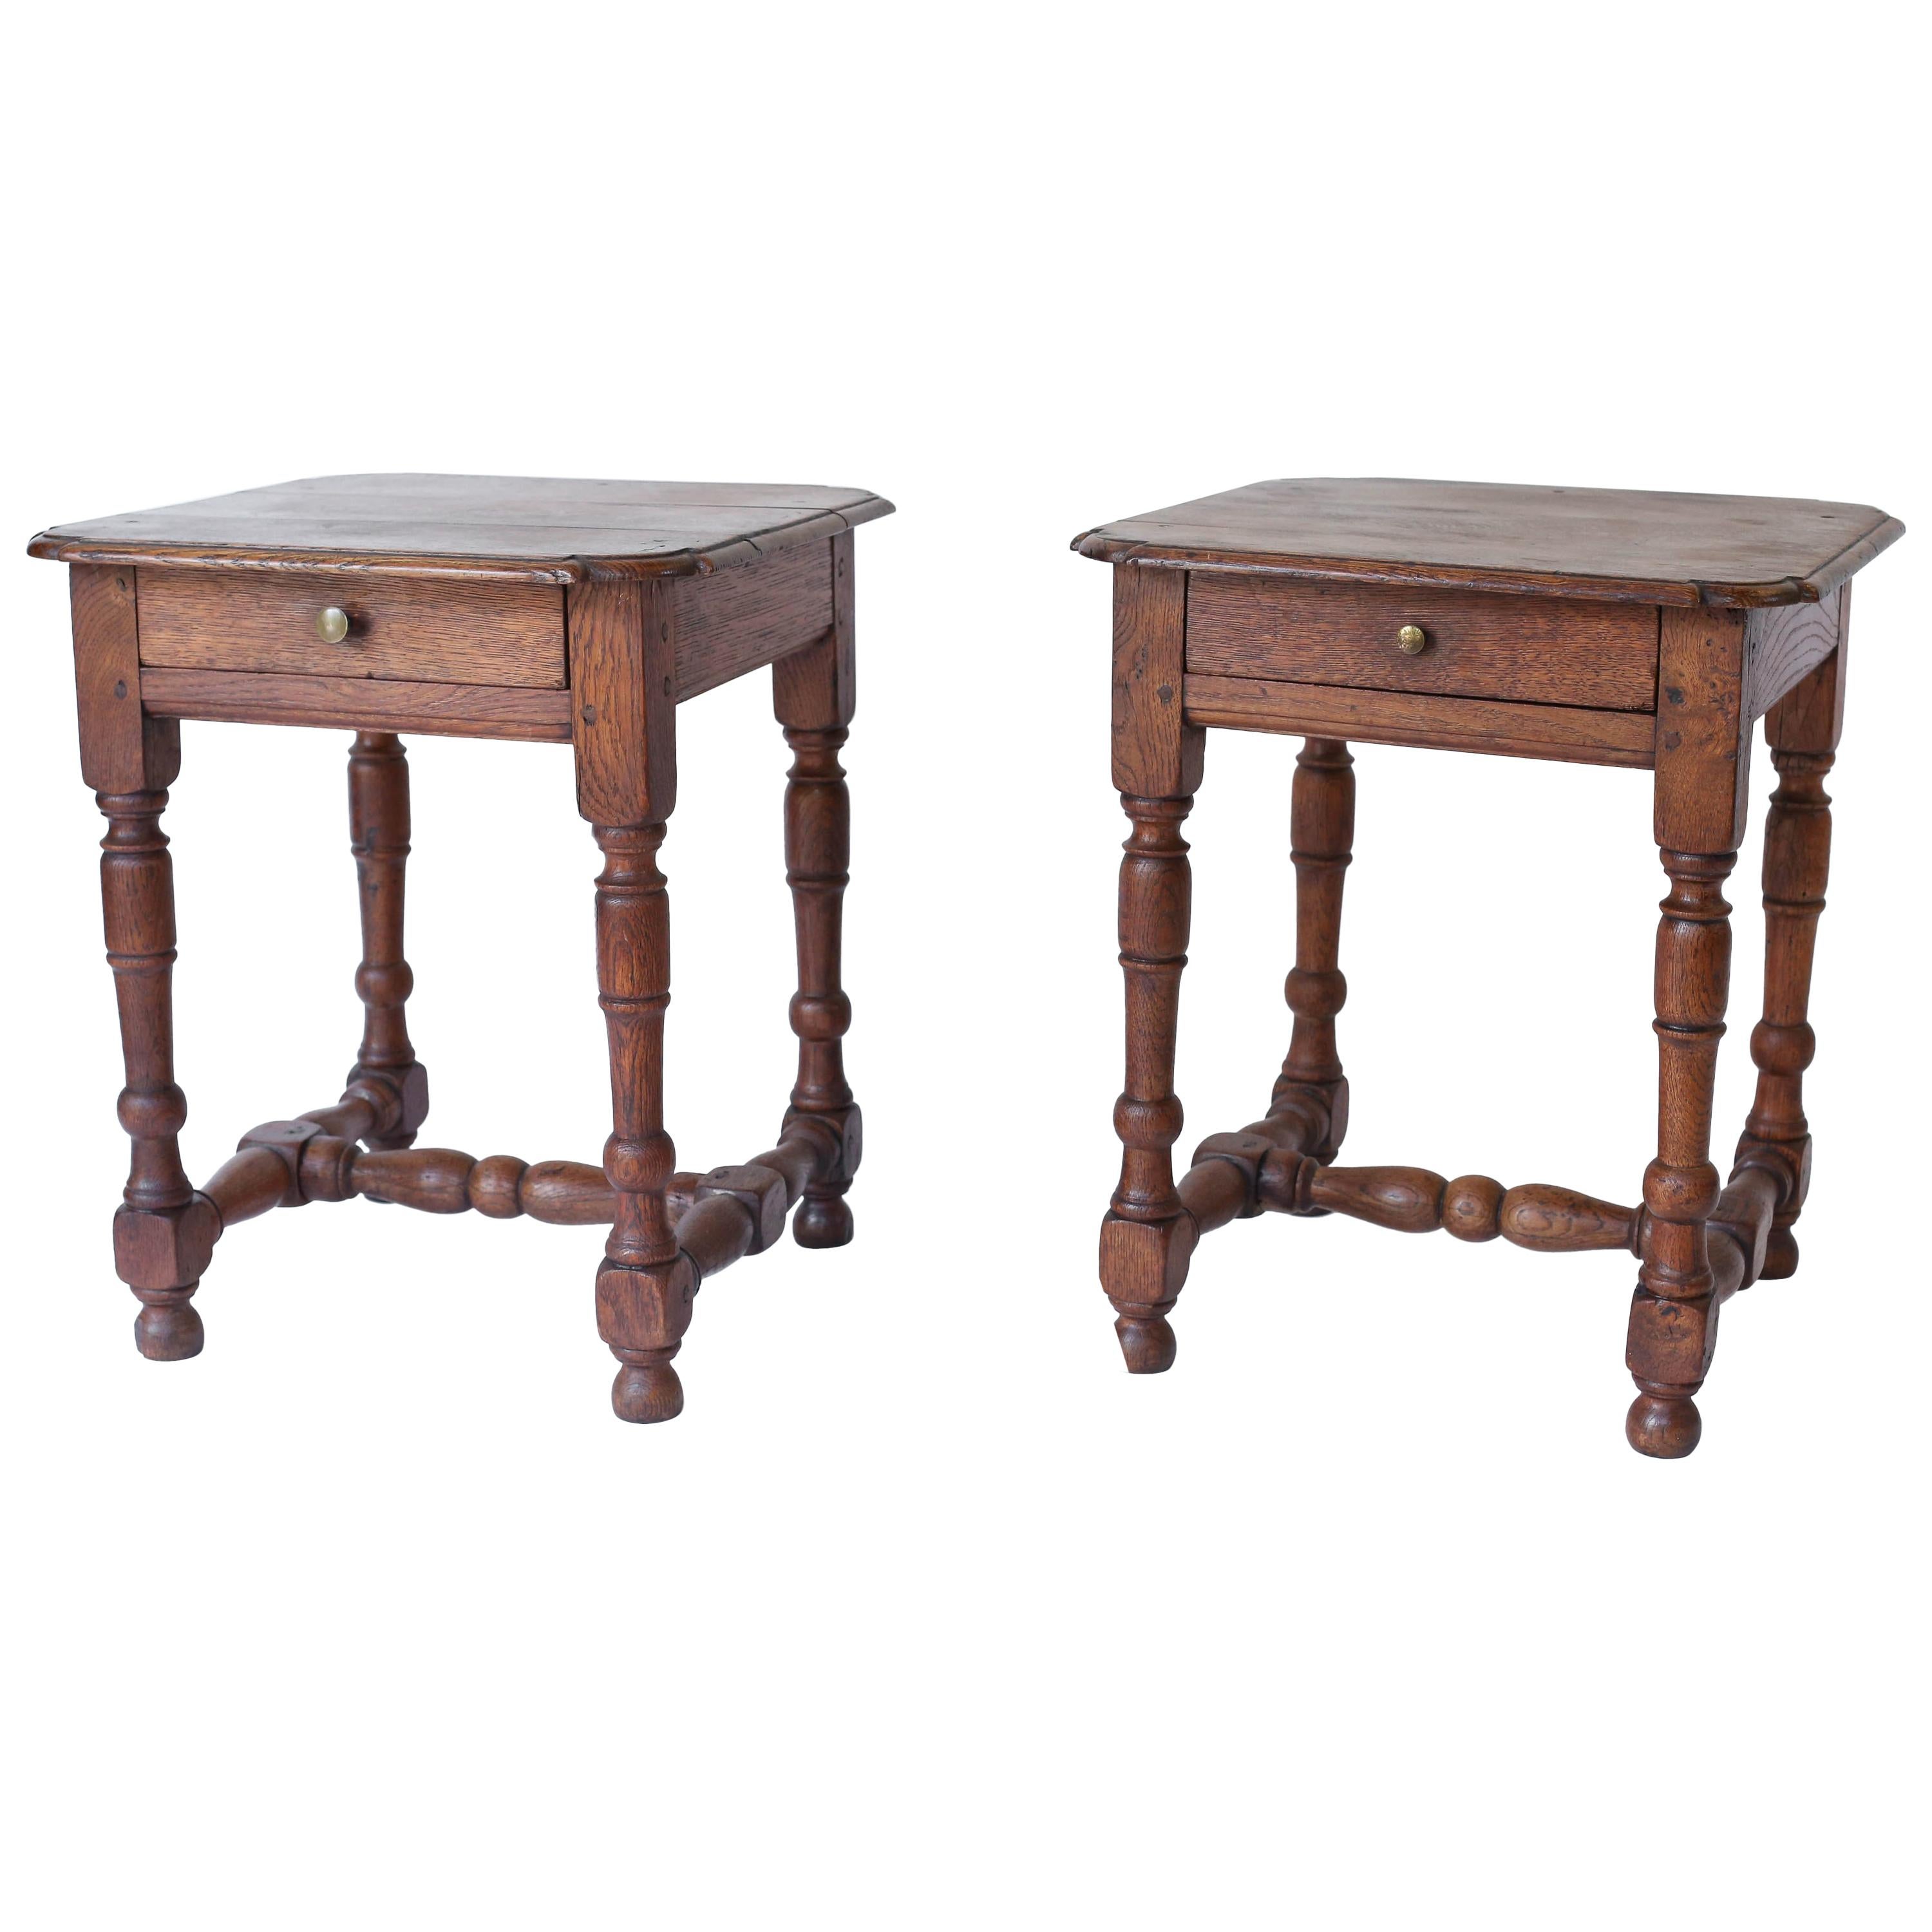 Pair of Oak Turned Leg Side Tables with Drawer